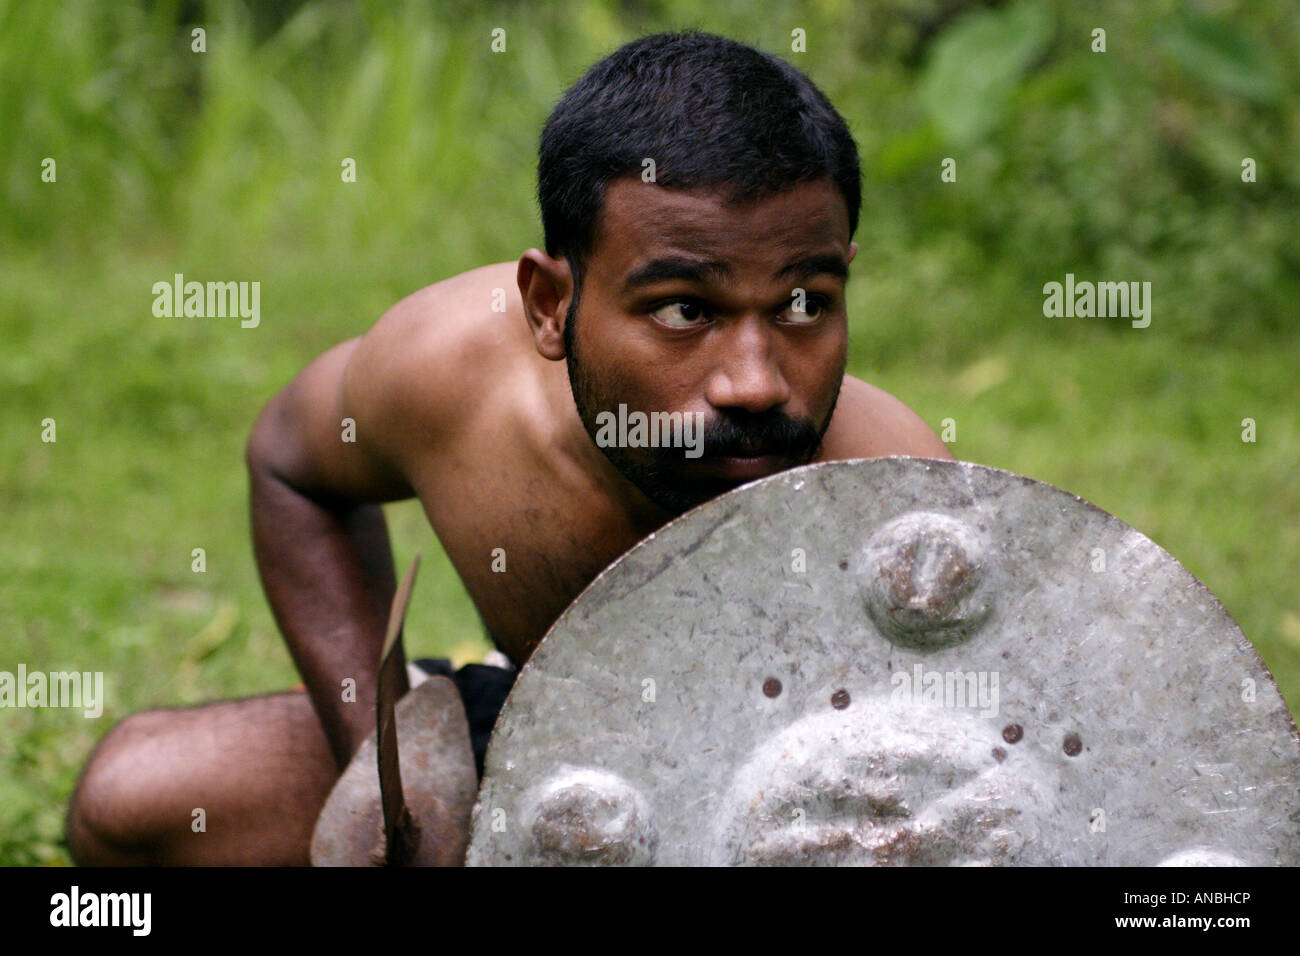 A man practices the ancient martial art of Kalarippayattu in Kerala, India. He is a defensive stance. Stock Photo